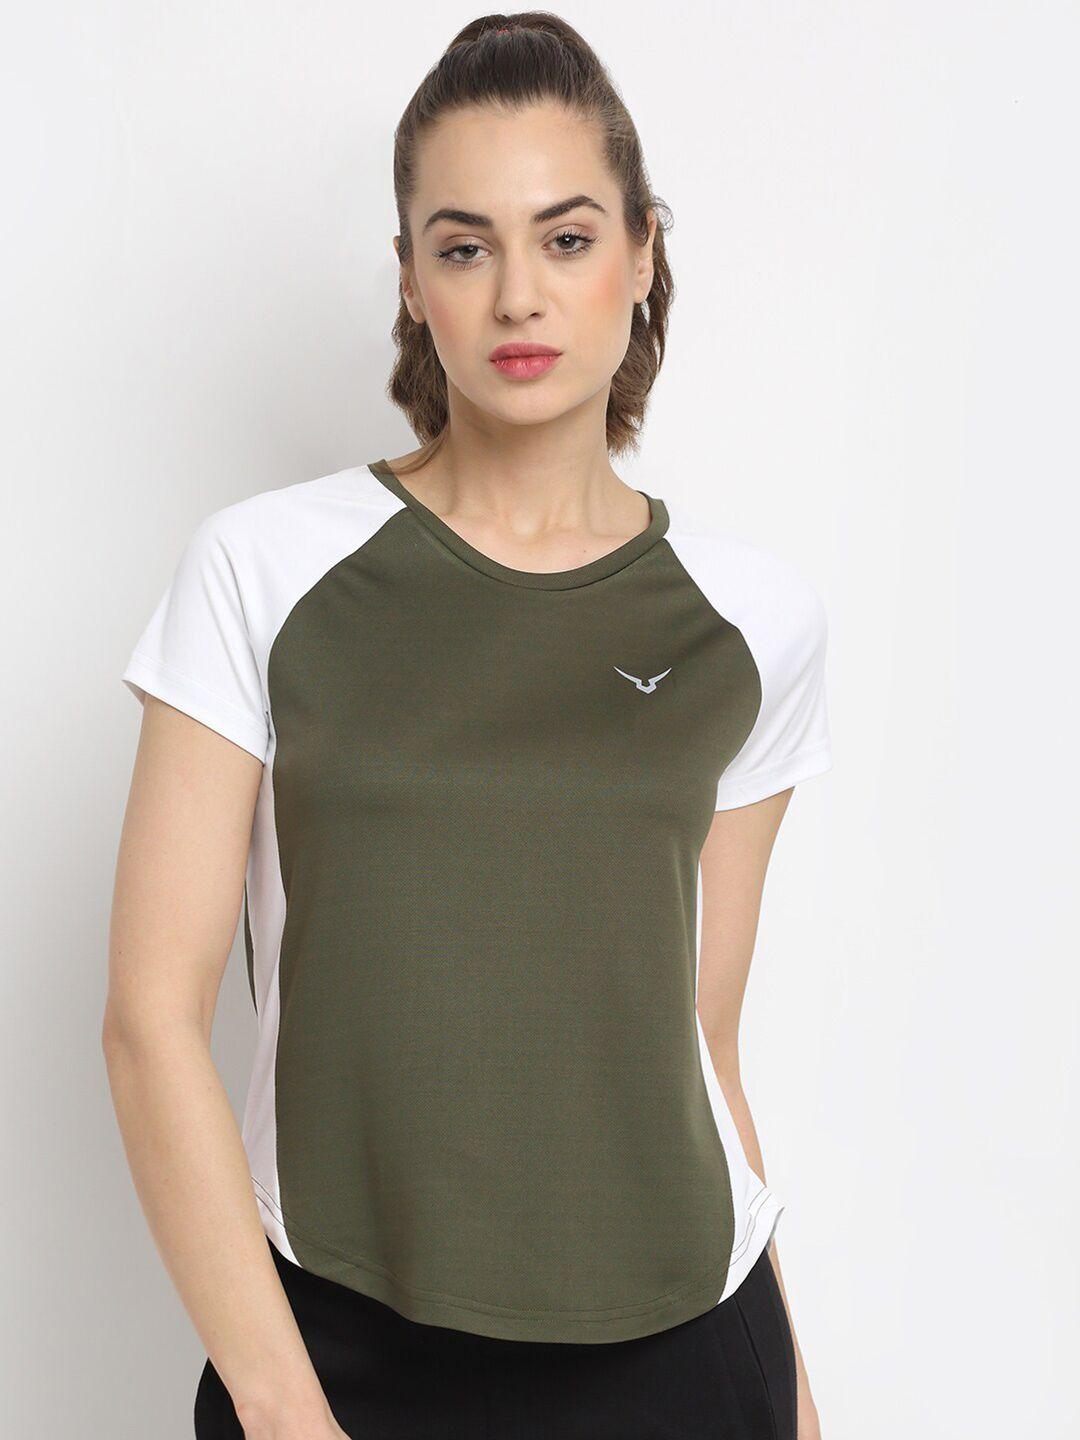 invincible women olive green & white colourblocked training or gym rapid dry t-shirt